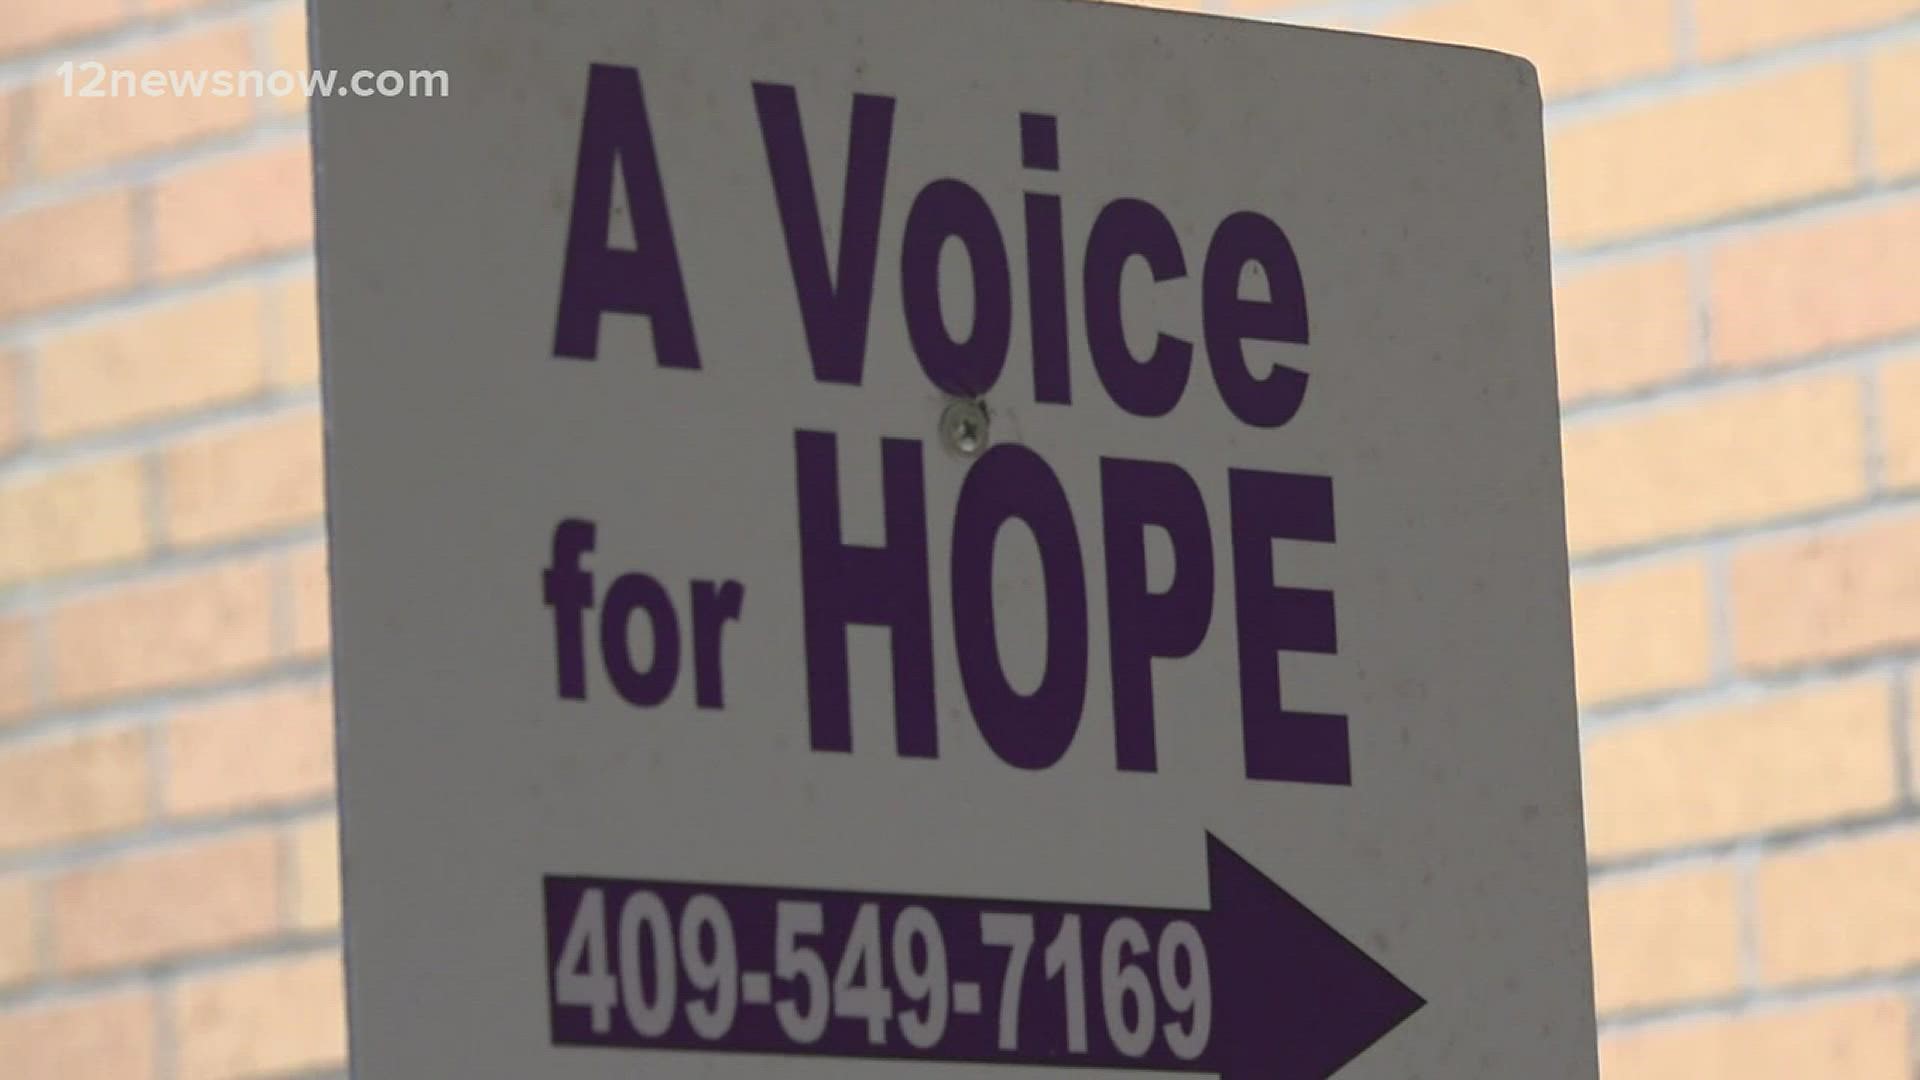 "A Voice for Hope" is helping survivors of domestic violence get a job, shelter, and advice.